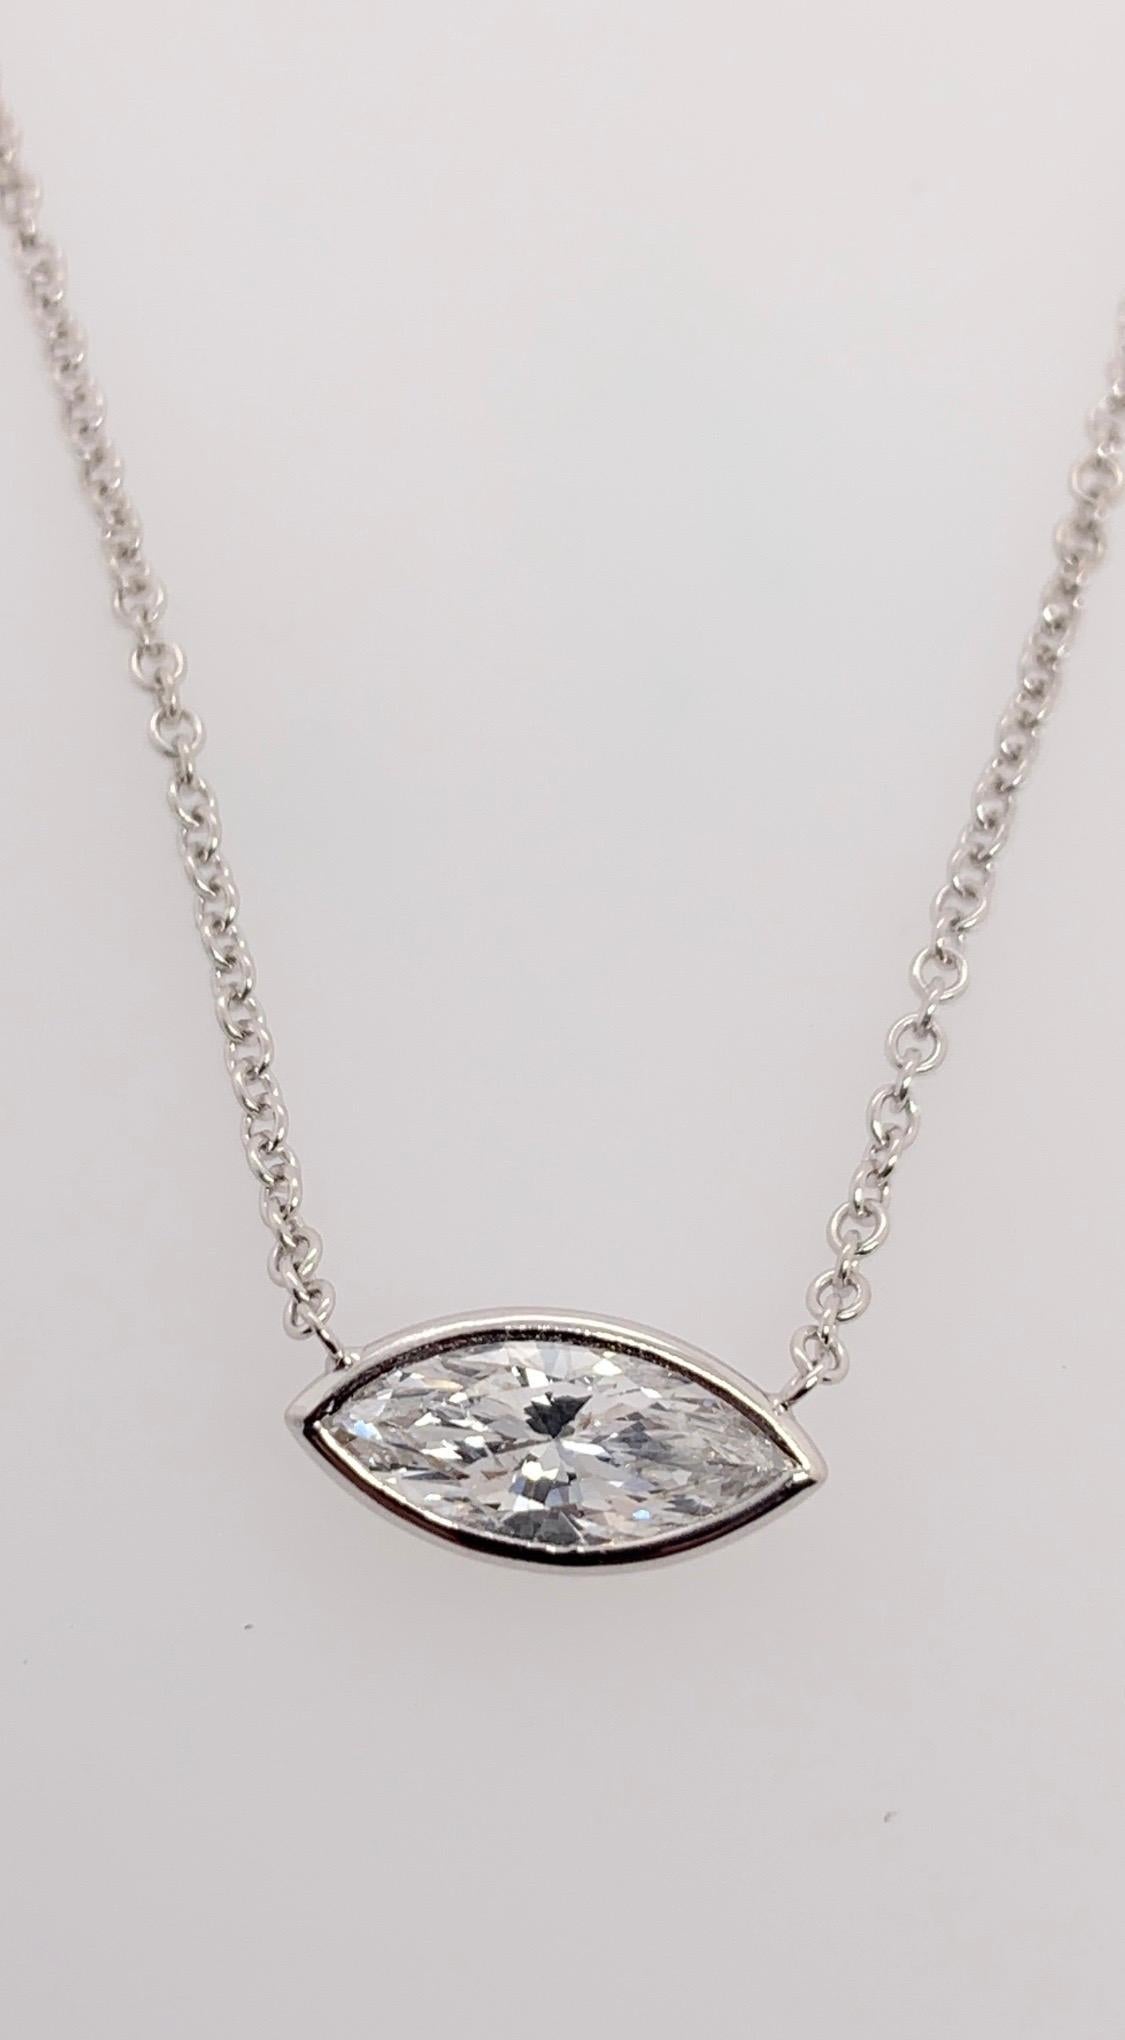 Stunning 14k White Gold Natural Marquise Diamond Pendant, certified by EGL USA as a D color and SI1 in clarity. The measurement is 10.91x4.96x3.11mm.

The Italian chain is 16 inches in length.

Weight is 2.76 grams.